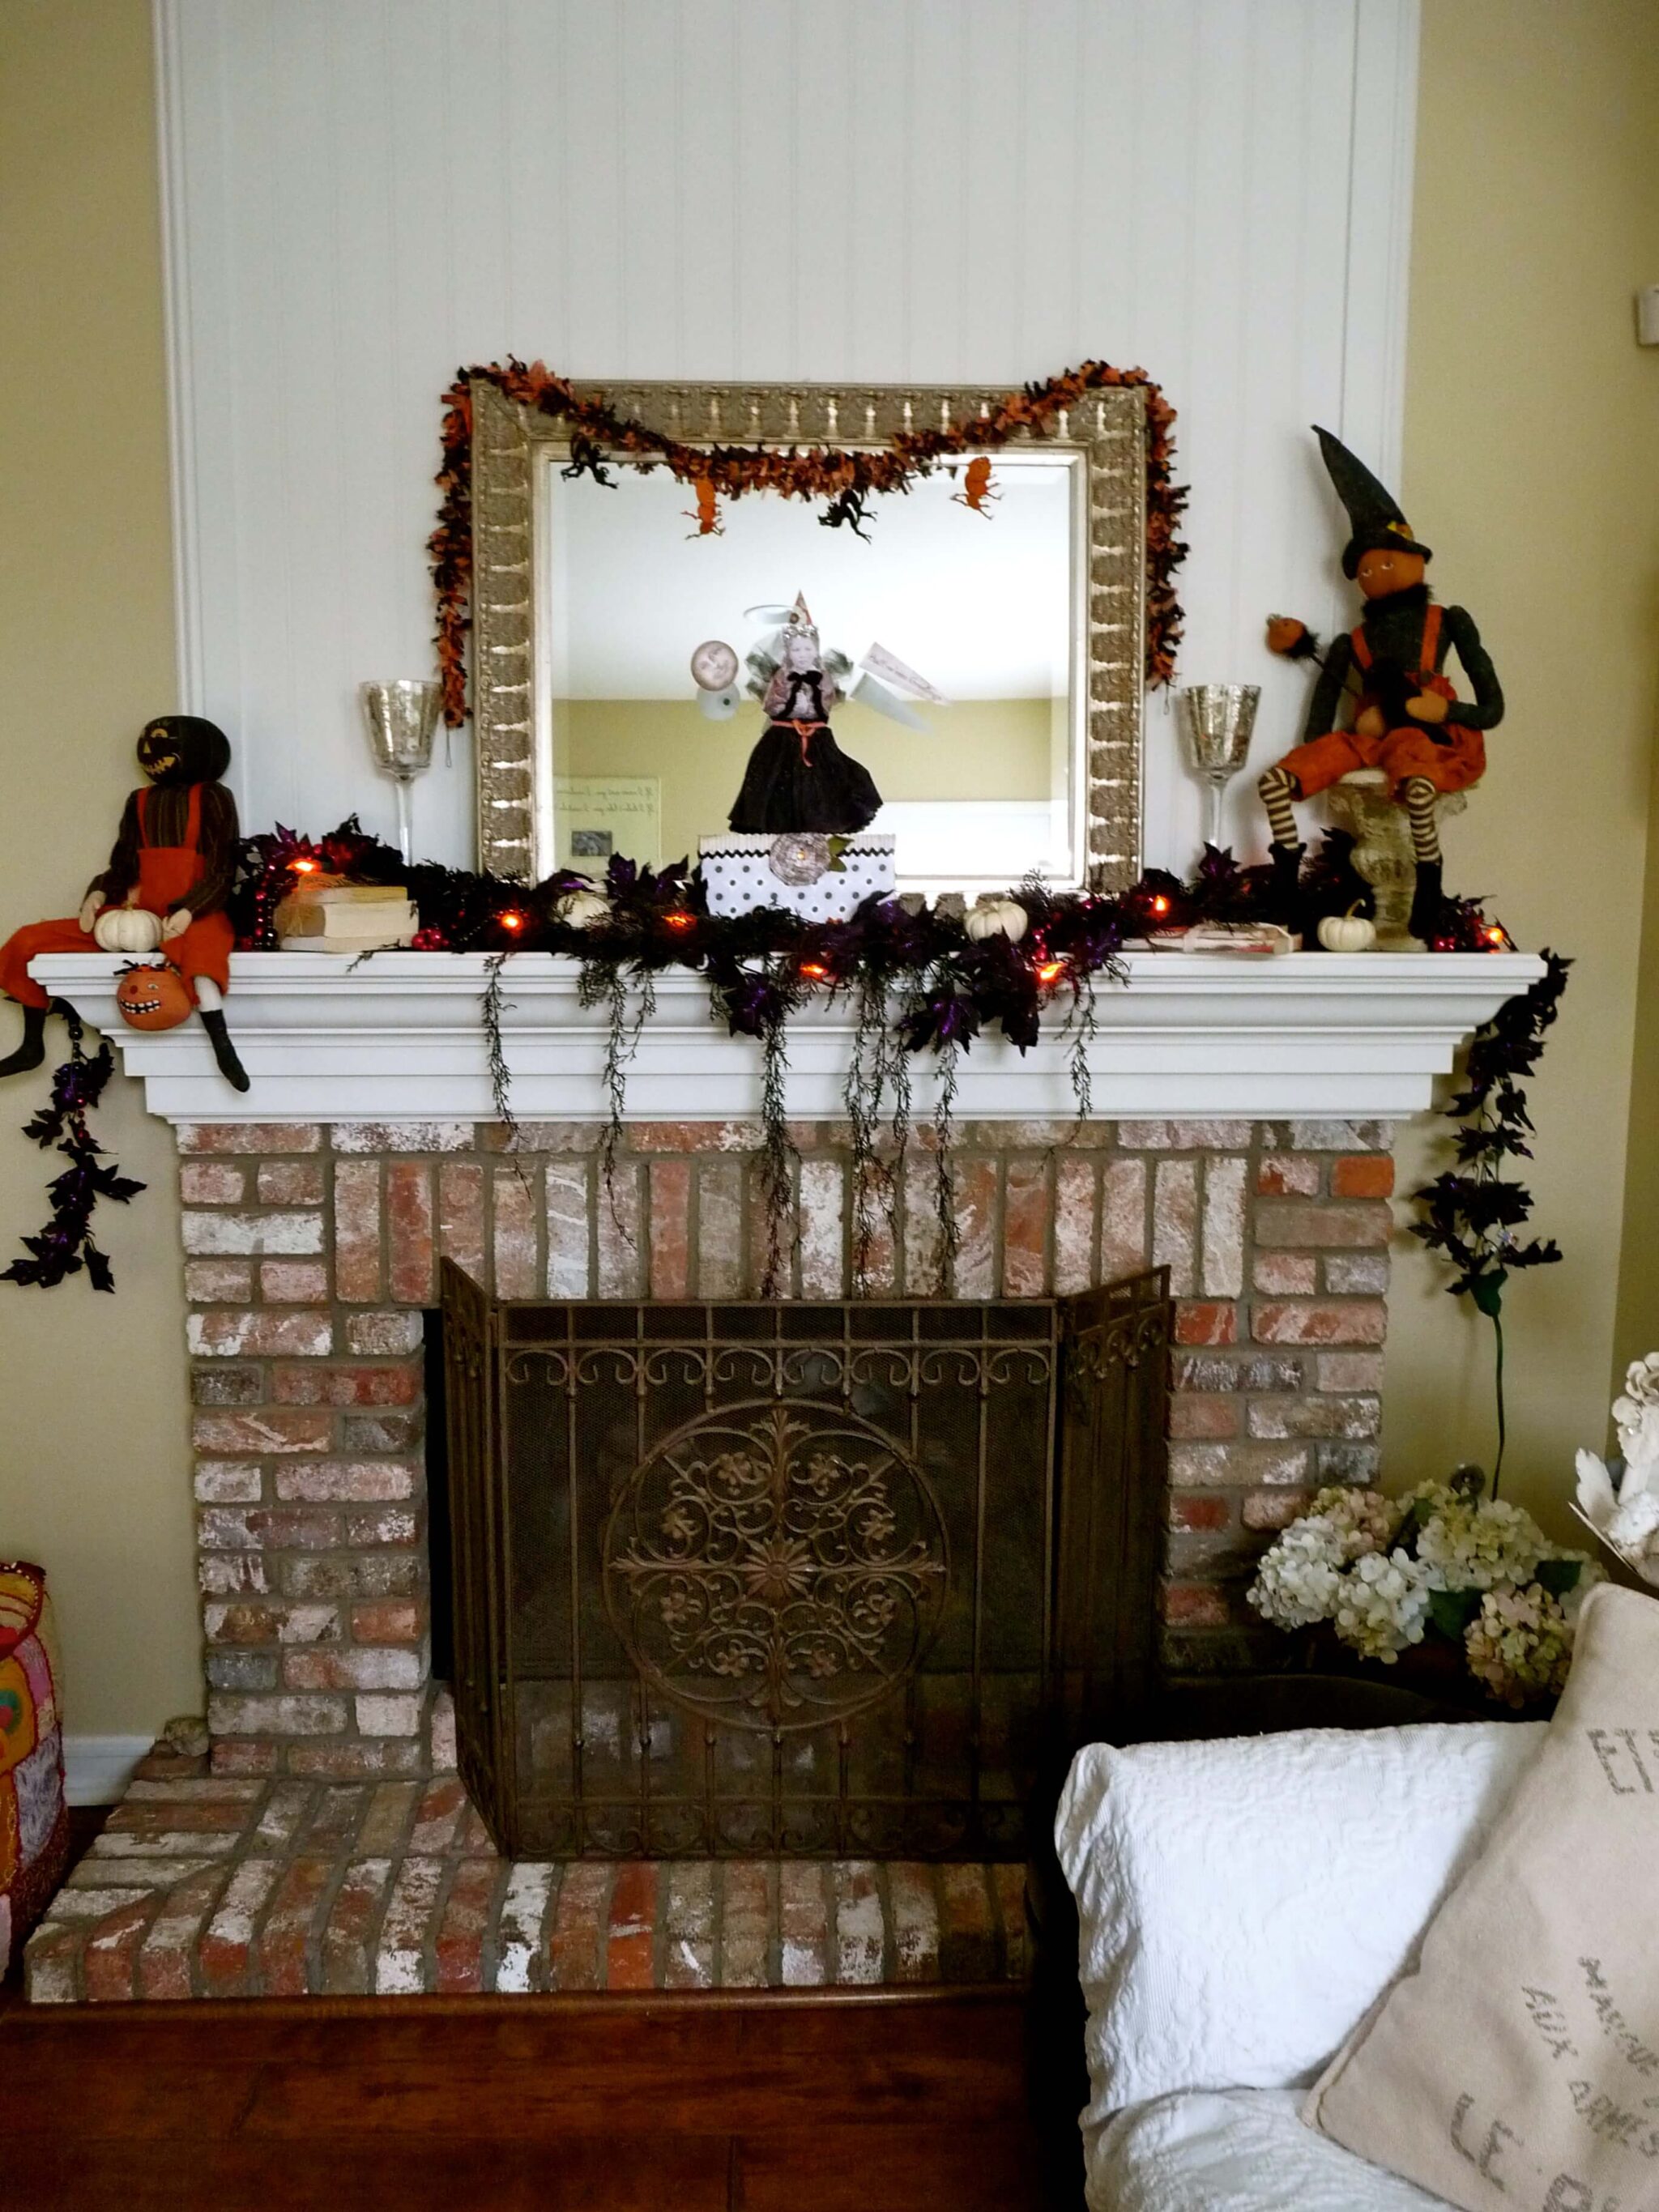 Home Tour: SoCal Howl’n Shabby-Chic Halloween Home-Part 2 - HomeJelly